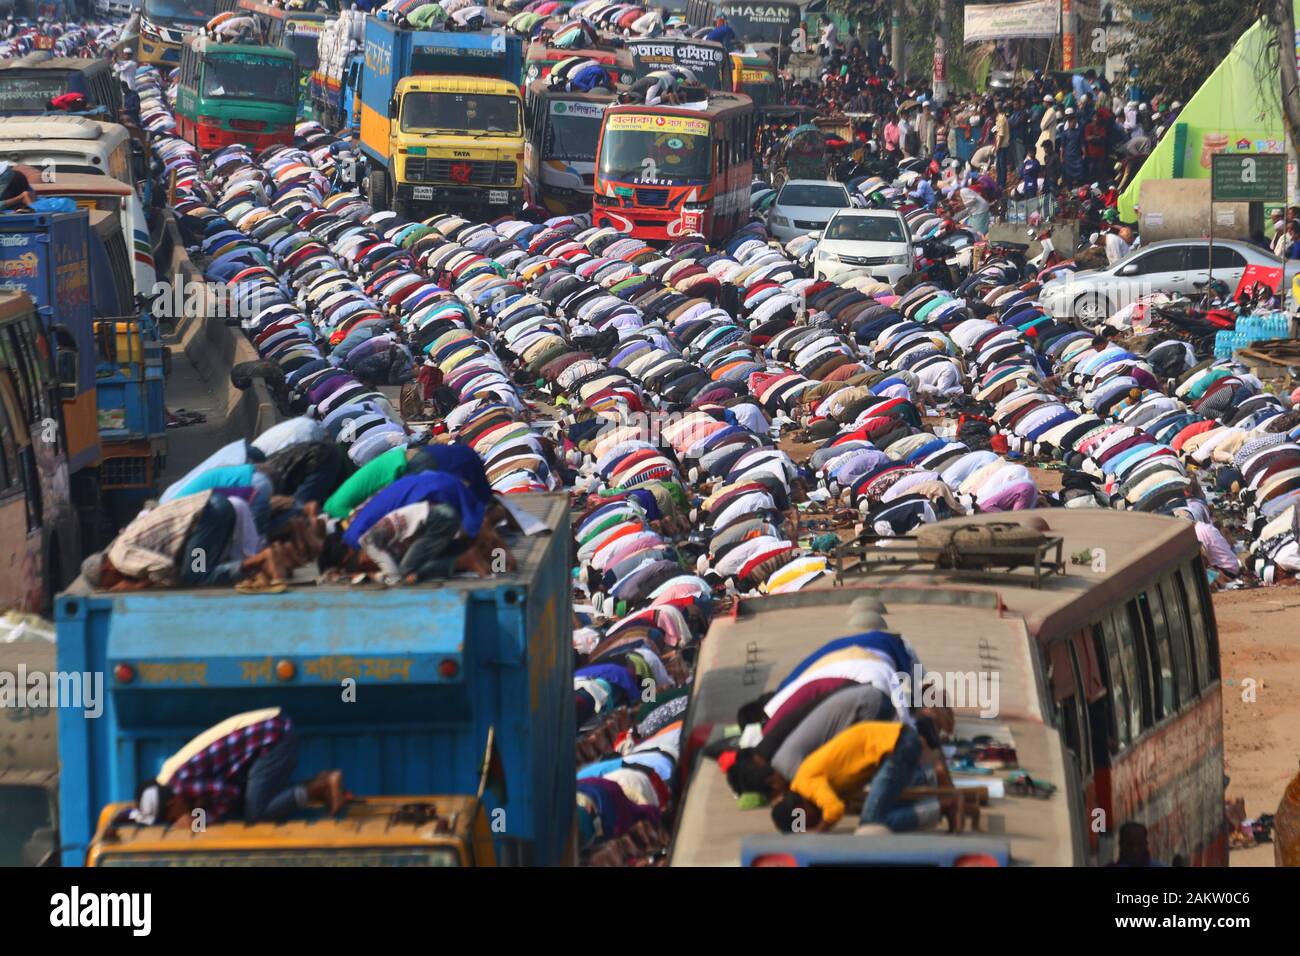 Muslim devotees offer prayers during the World Muslim Congregation, also known as 'Biswa Ijtema' at Tongi on the outskirts of Dhaka.Millions of Muslim devotees from around the world join the four-day long event that ends with a special prayer on the final day. Stock Photo